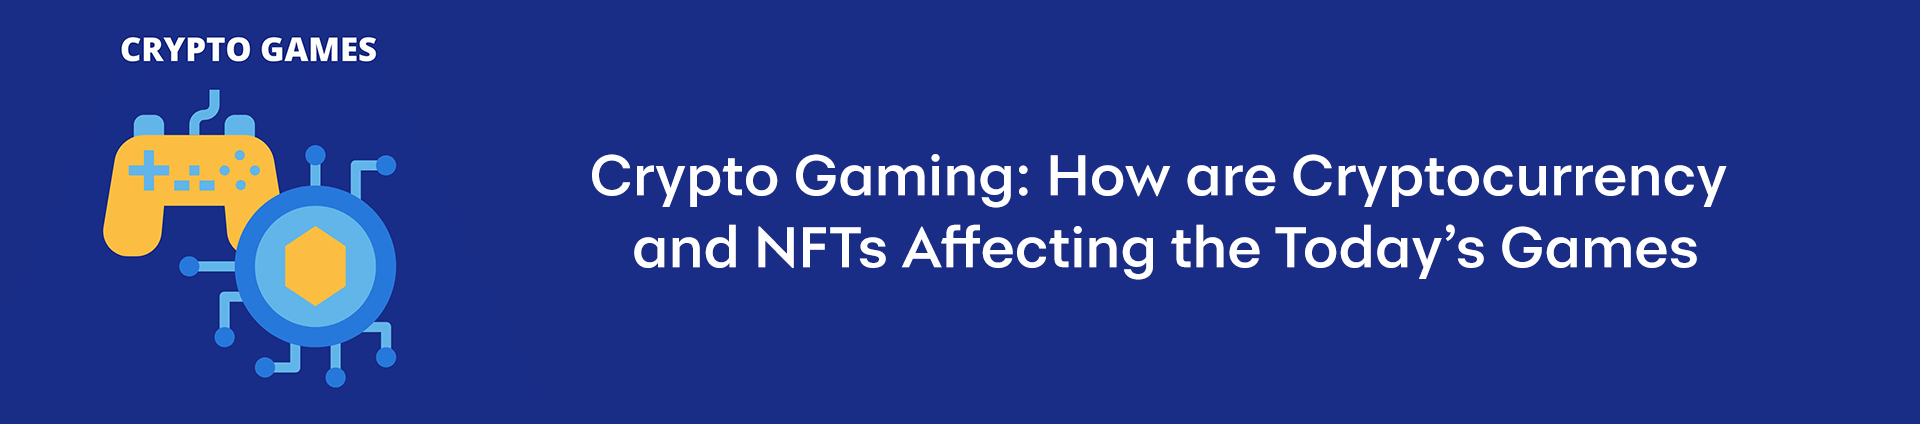 How Cryptocurrency and NFTs Affecting the Today’s Games